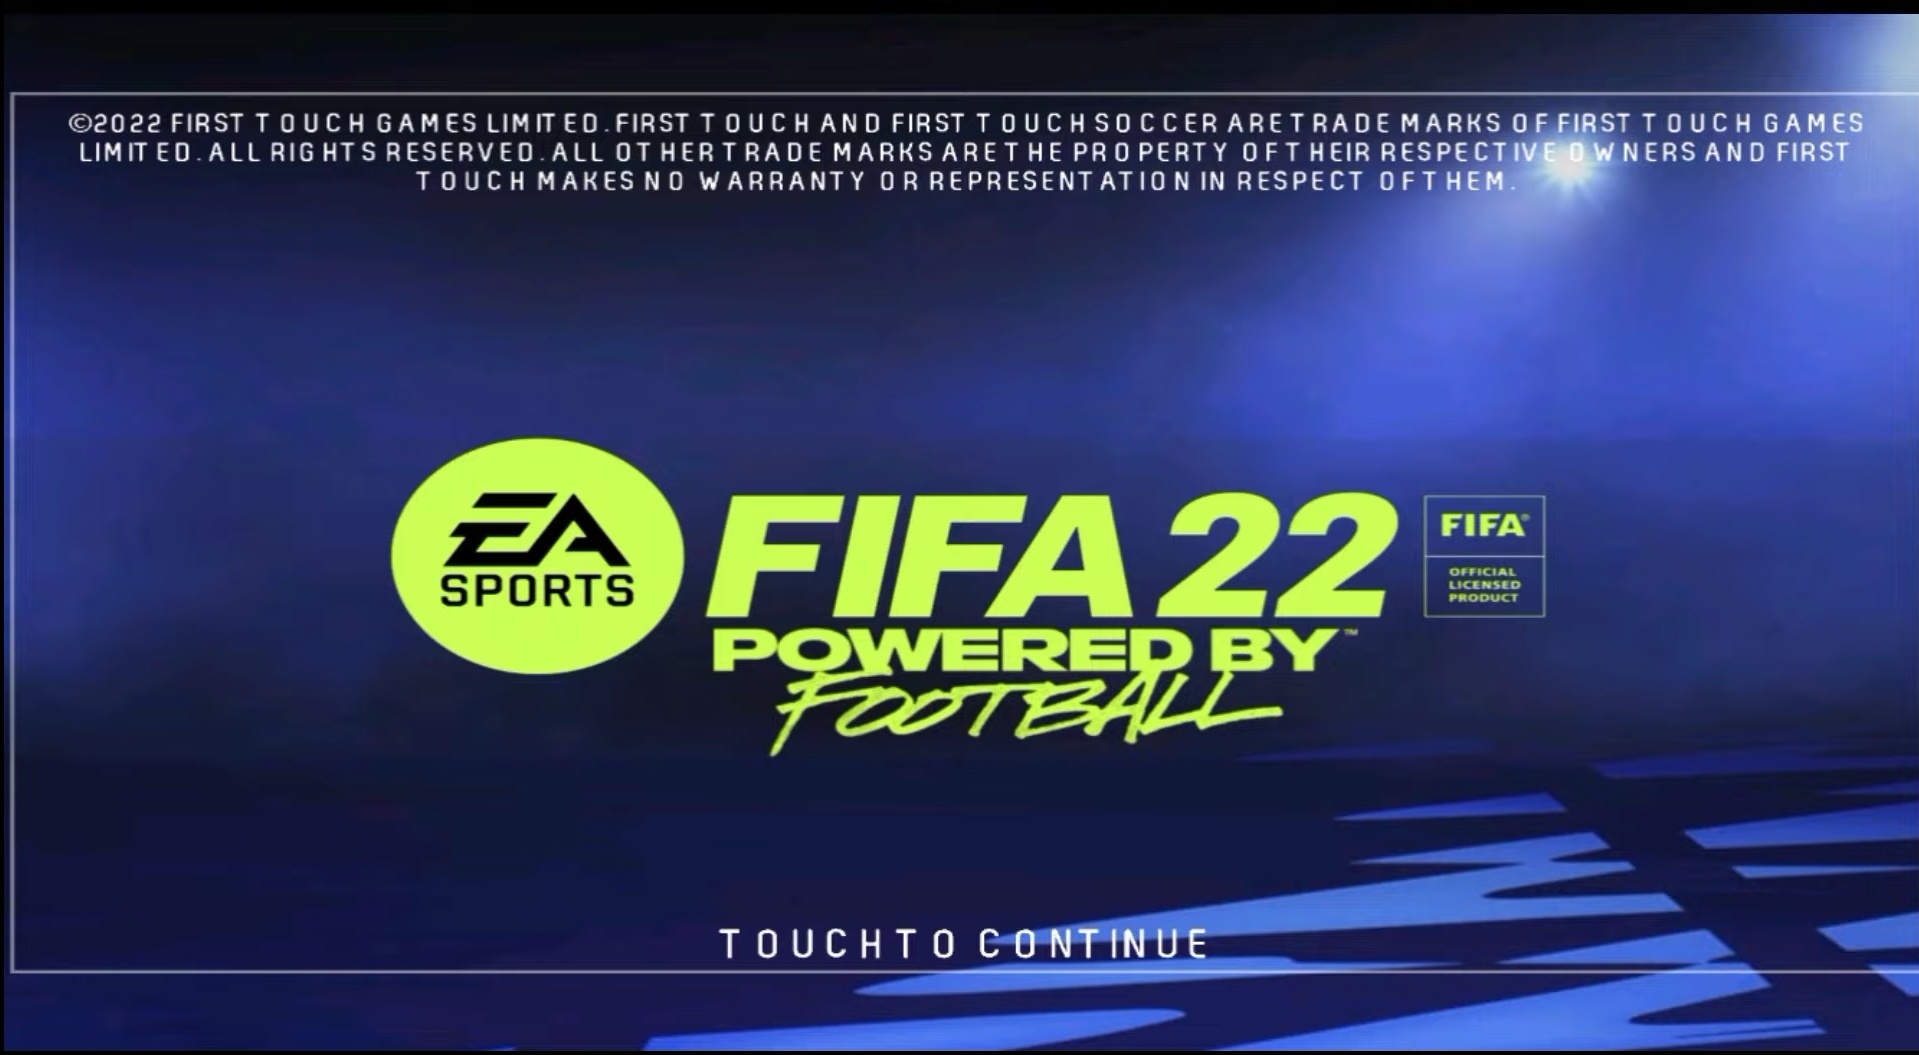 FTS 22 Mod FIFA 2022 Apk Obb Data Download for Android 